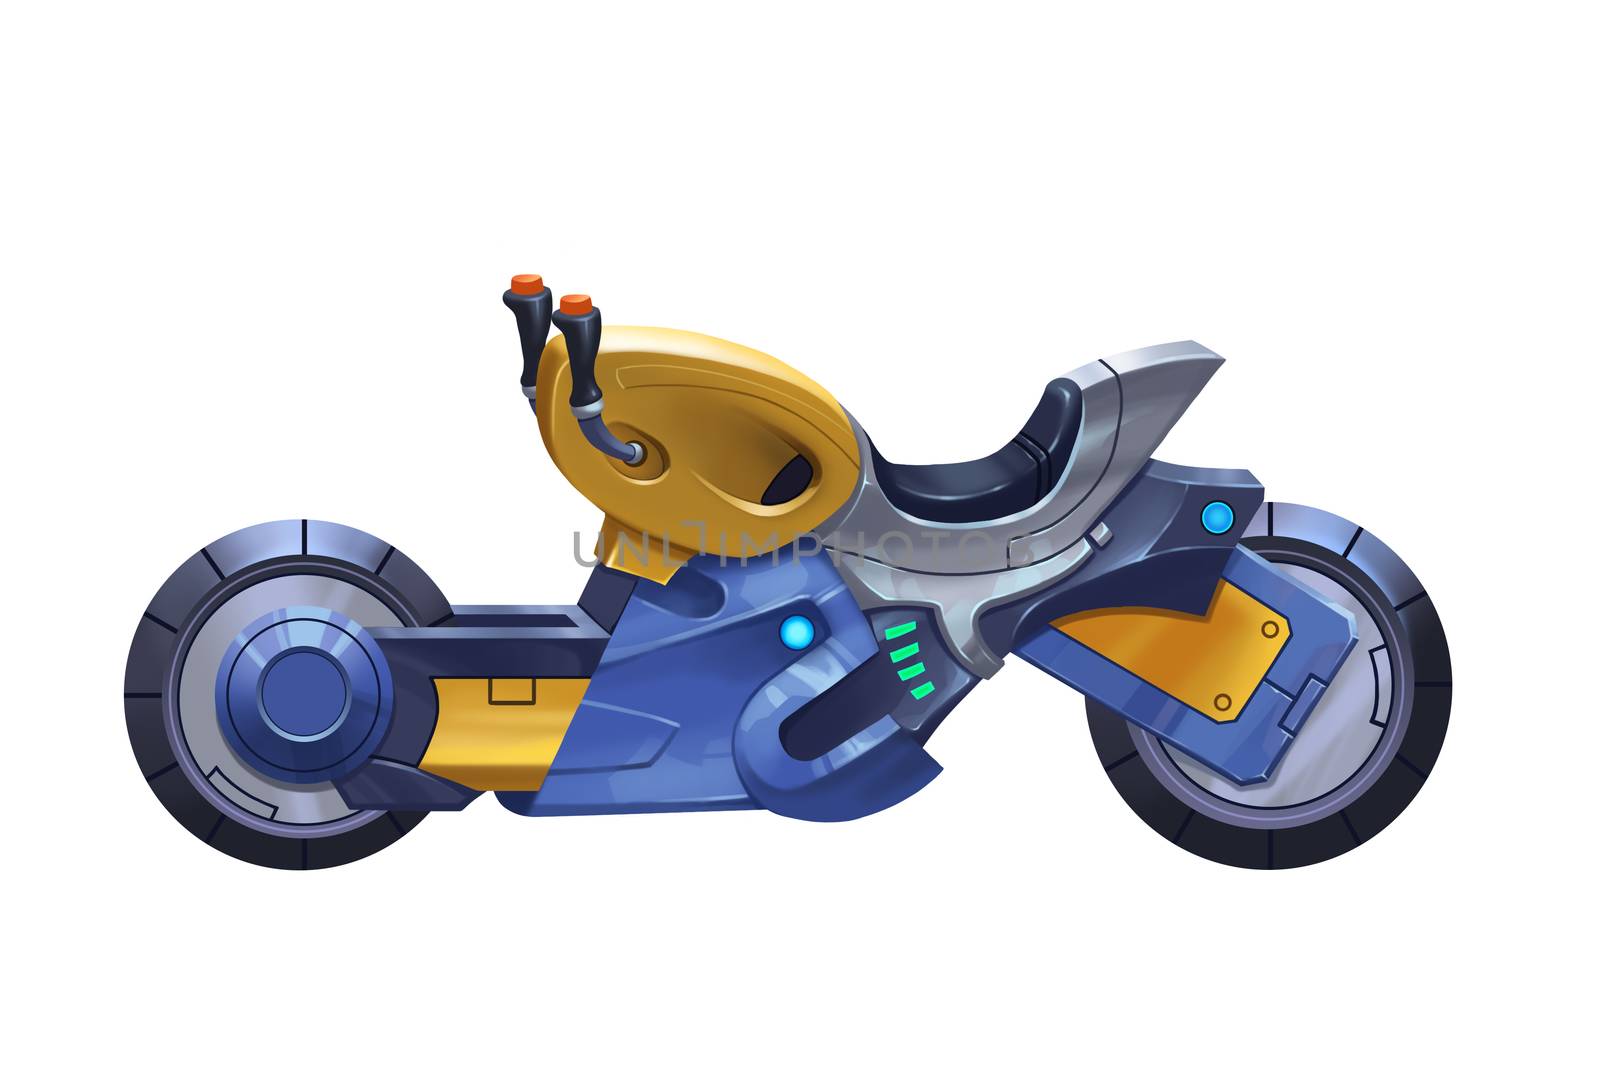 Illustration: The Fantastic Motorcycle - The Bounty Hunter's favorite vehicle. Element Creation. Cartoon / Sci-Fi Style